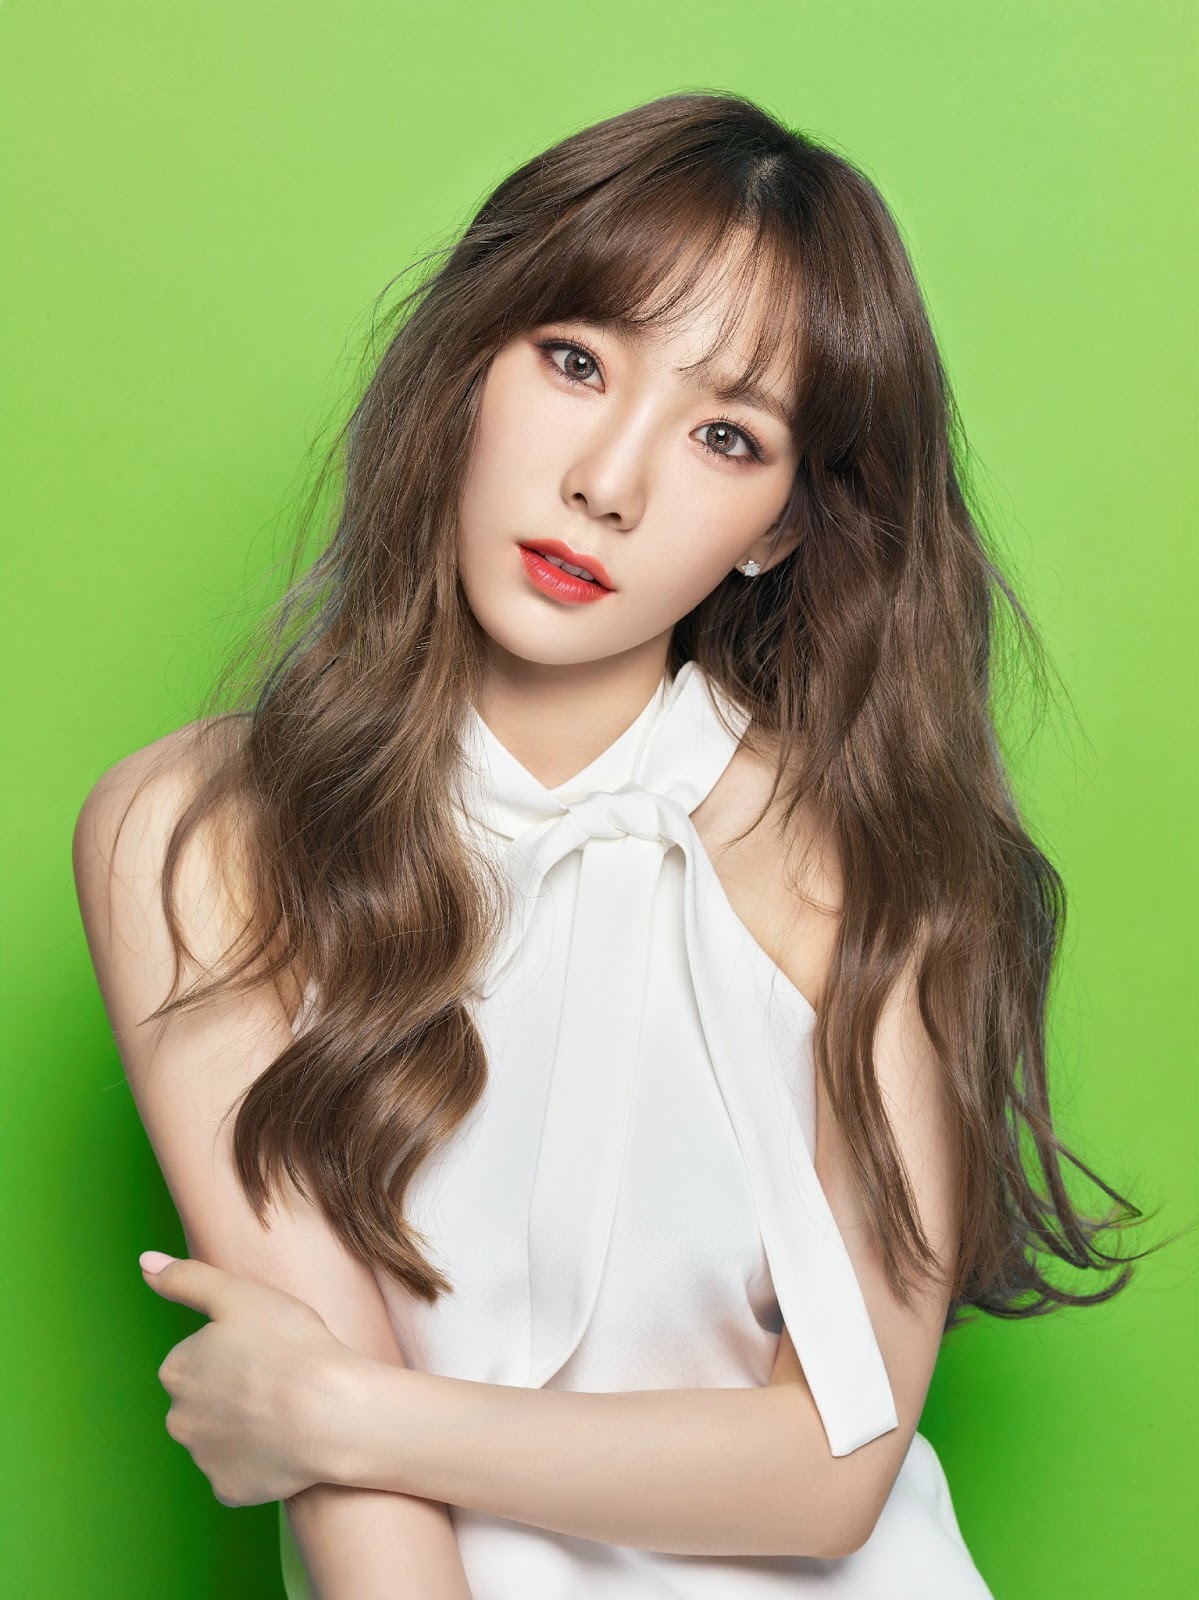 More Of Snsd Taeyeon S Charming Pictures From Banila Co Wonderful Generation